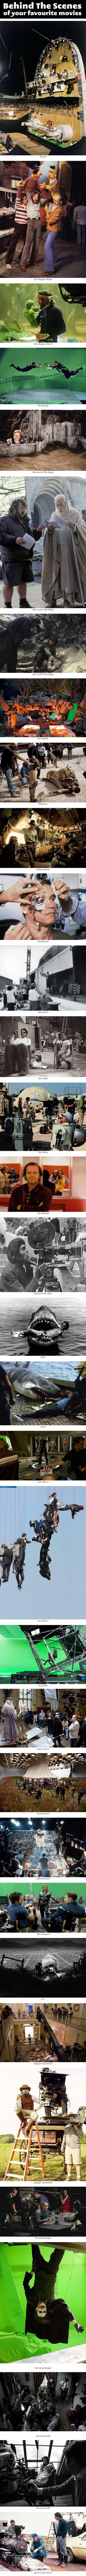 Behind the scenes of popular movies